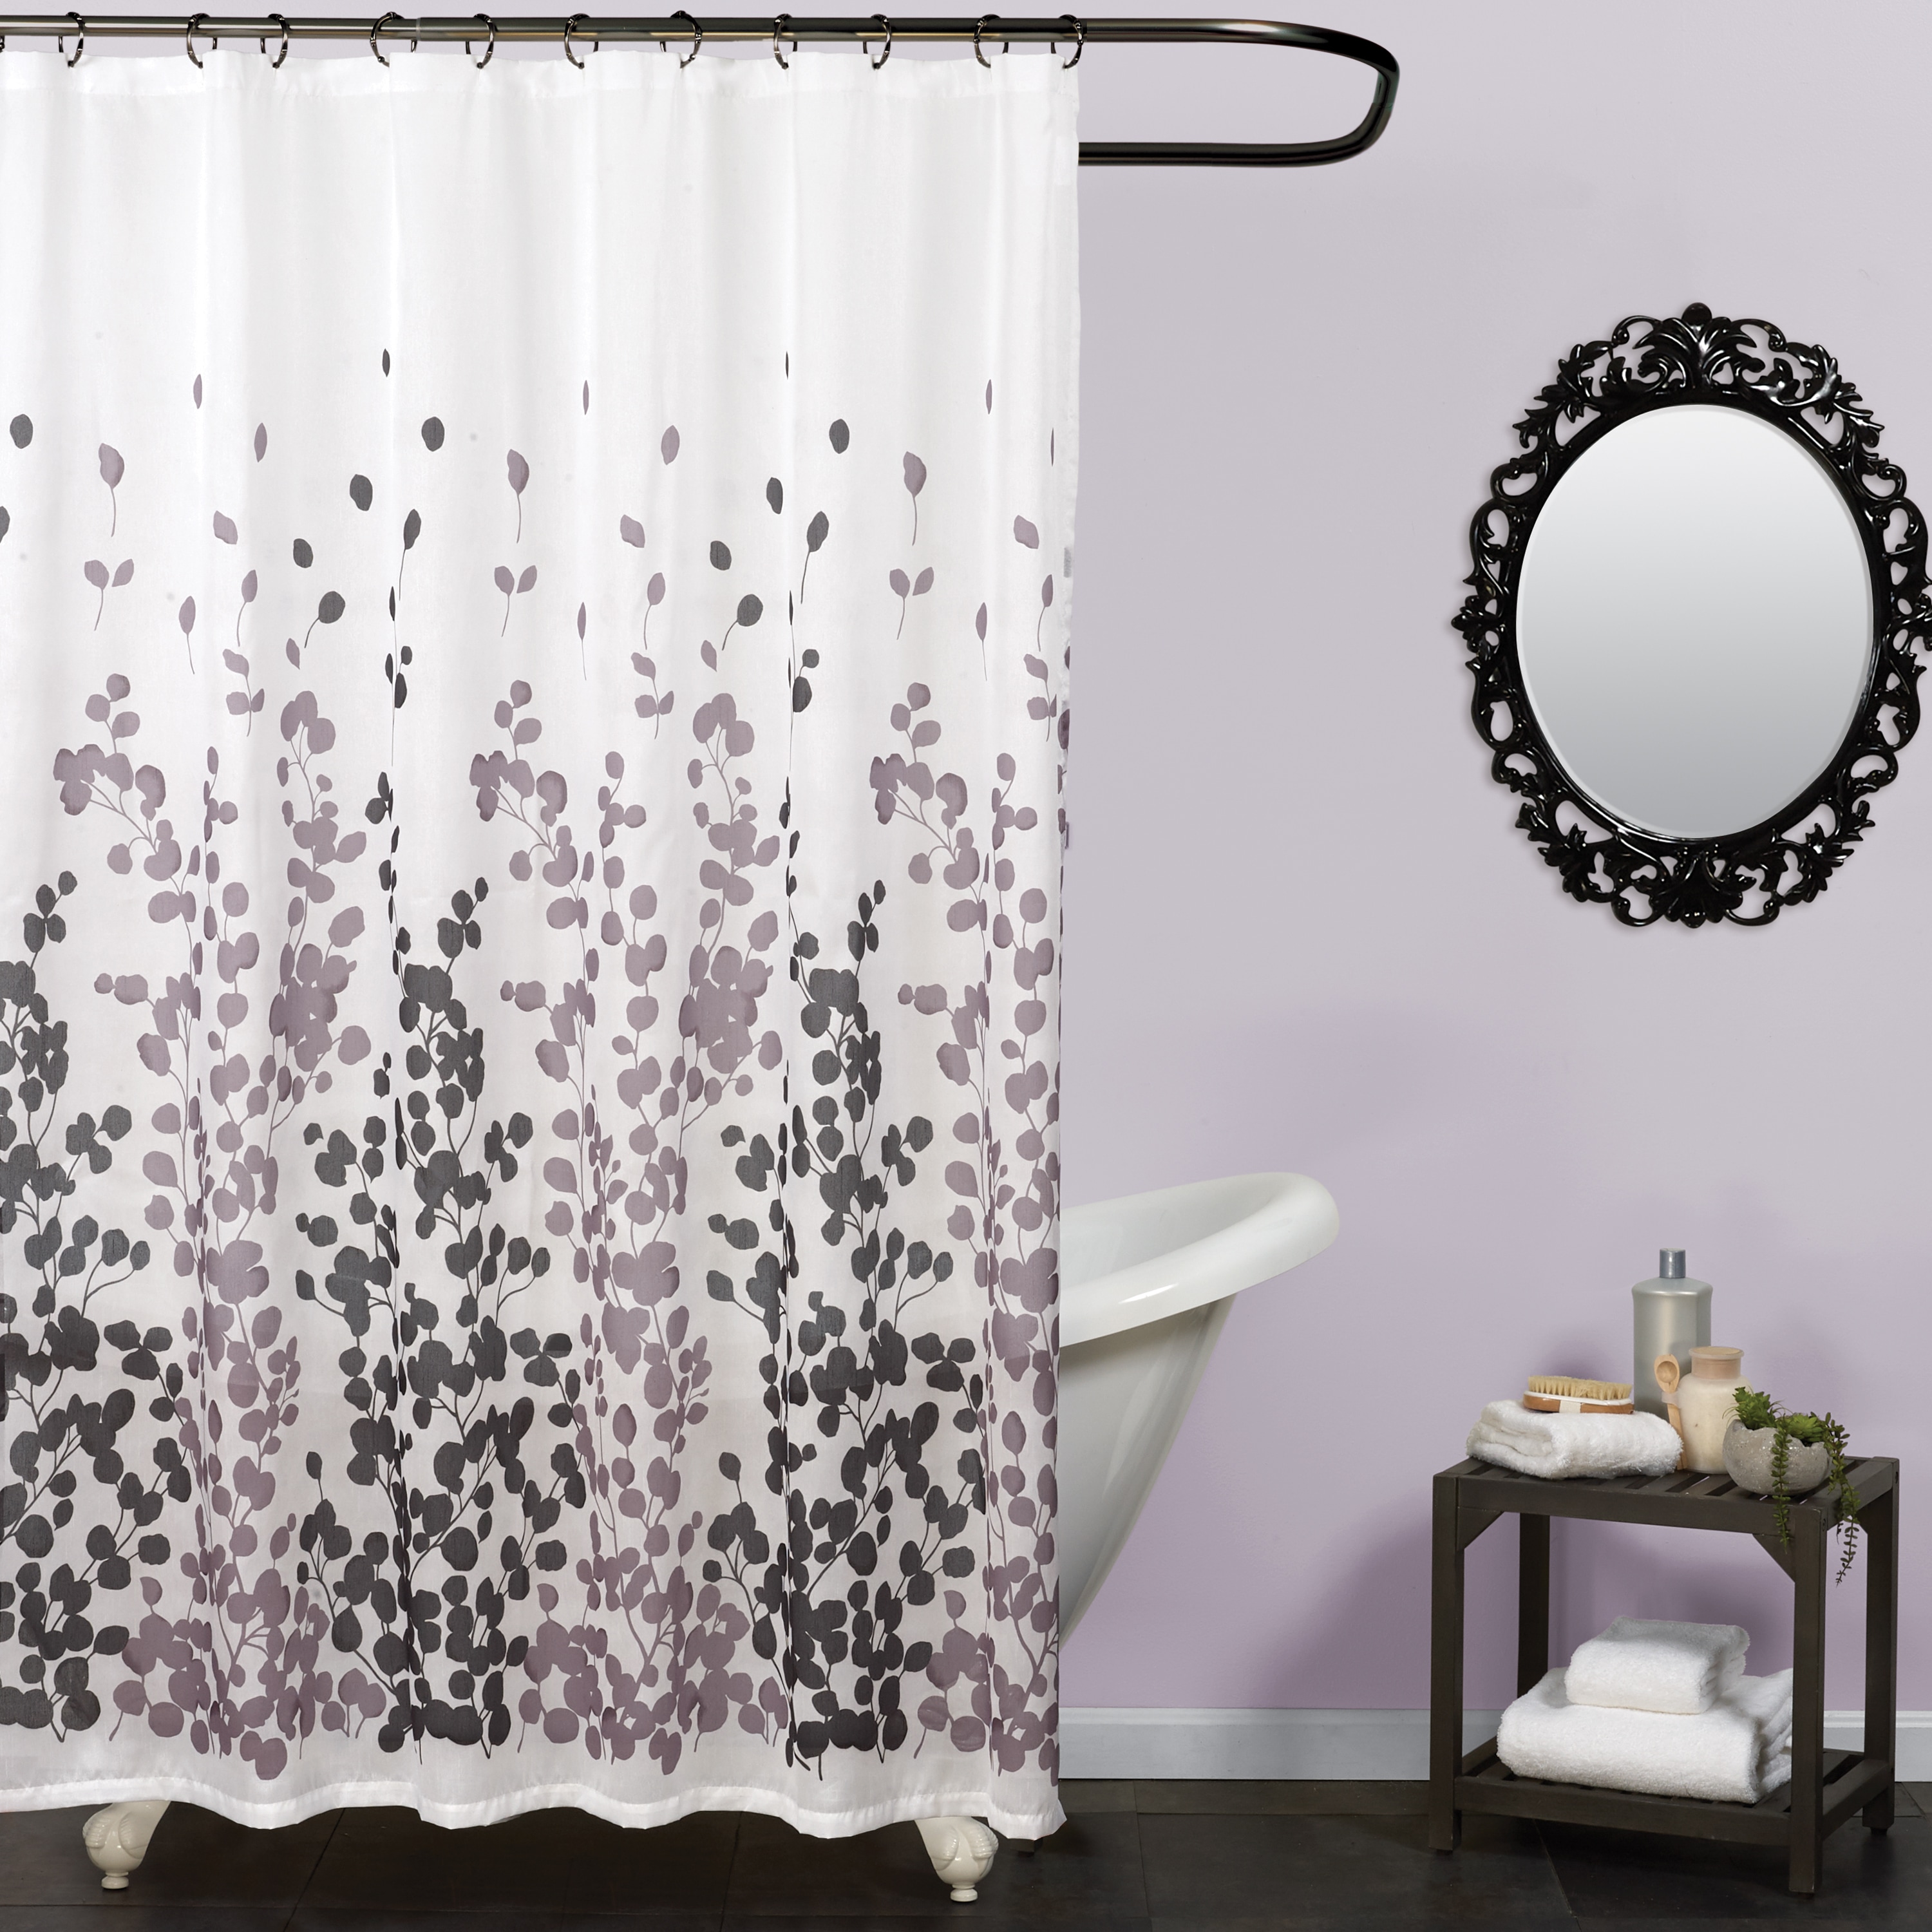 6 Bottom Magn Details about   Clear Shower Curtain Liner 82 Width by 74 Height with Free Hooks 